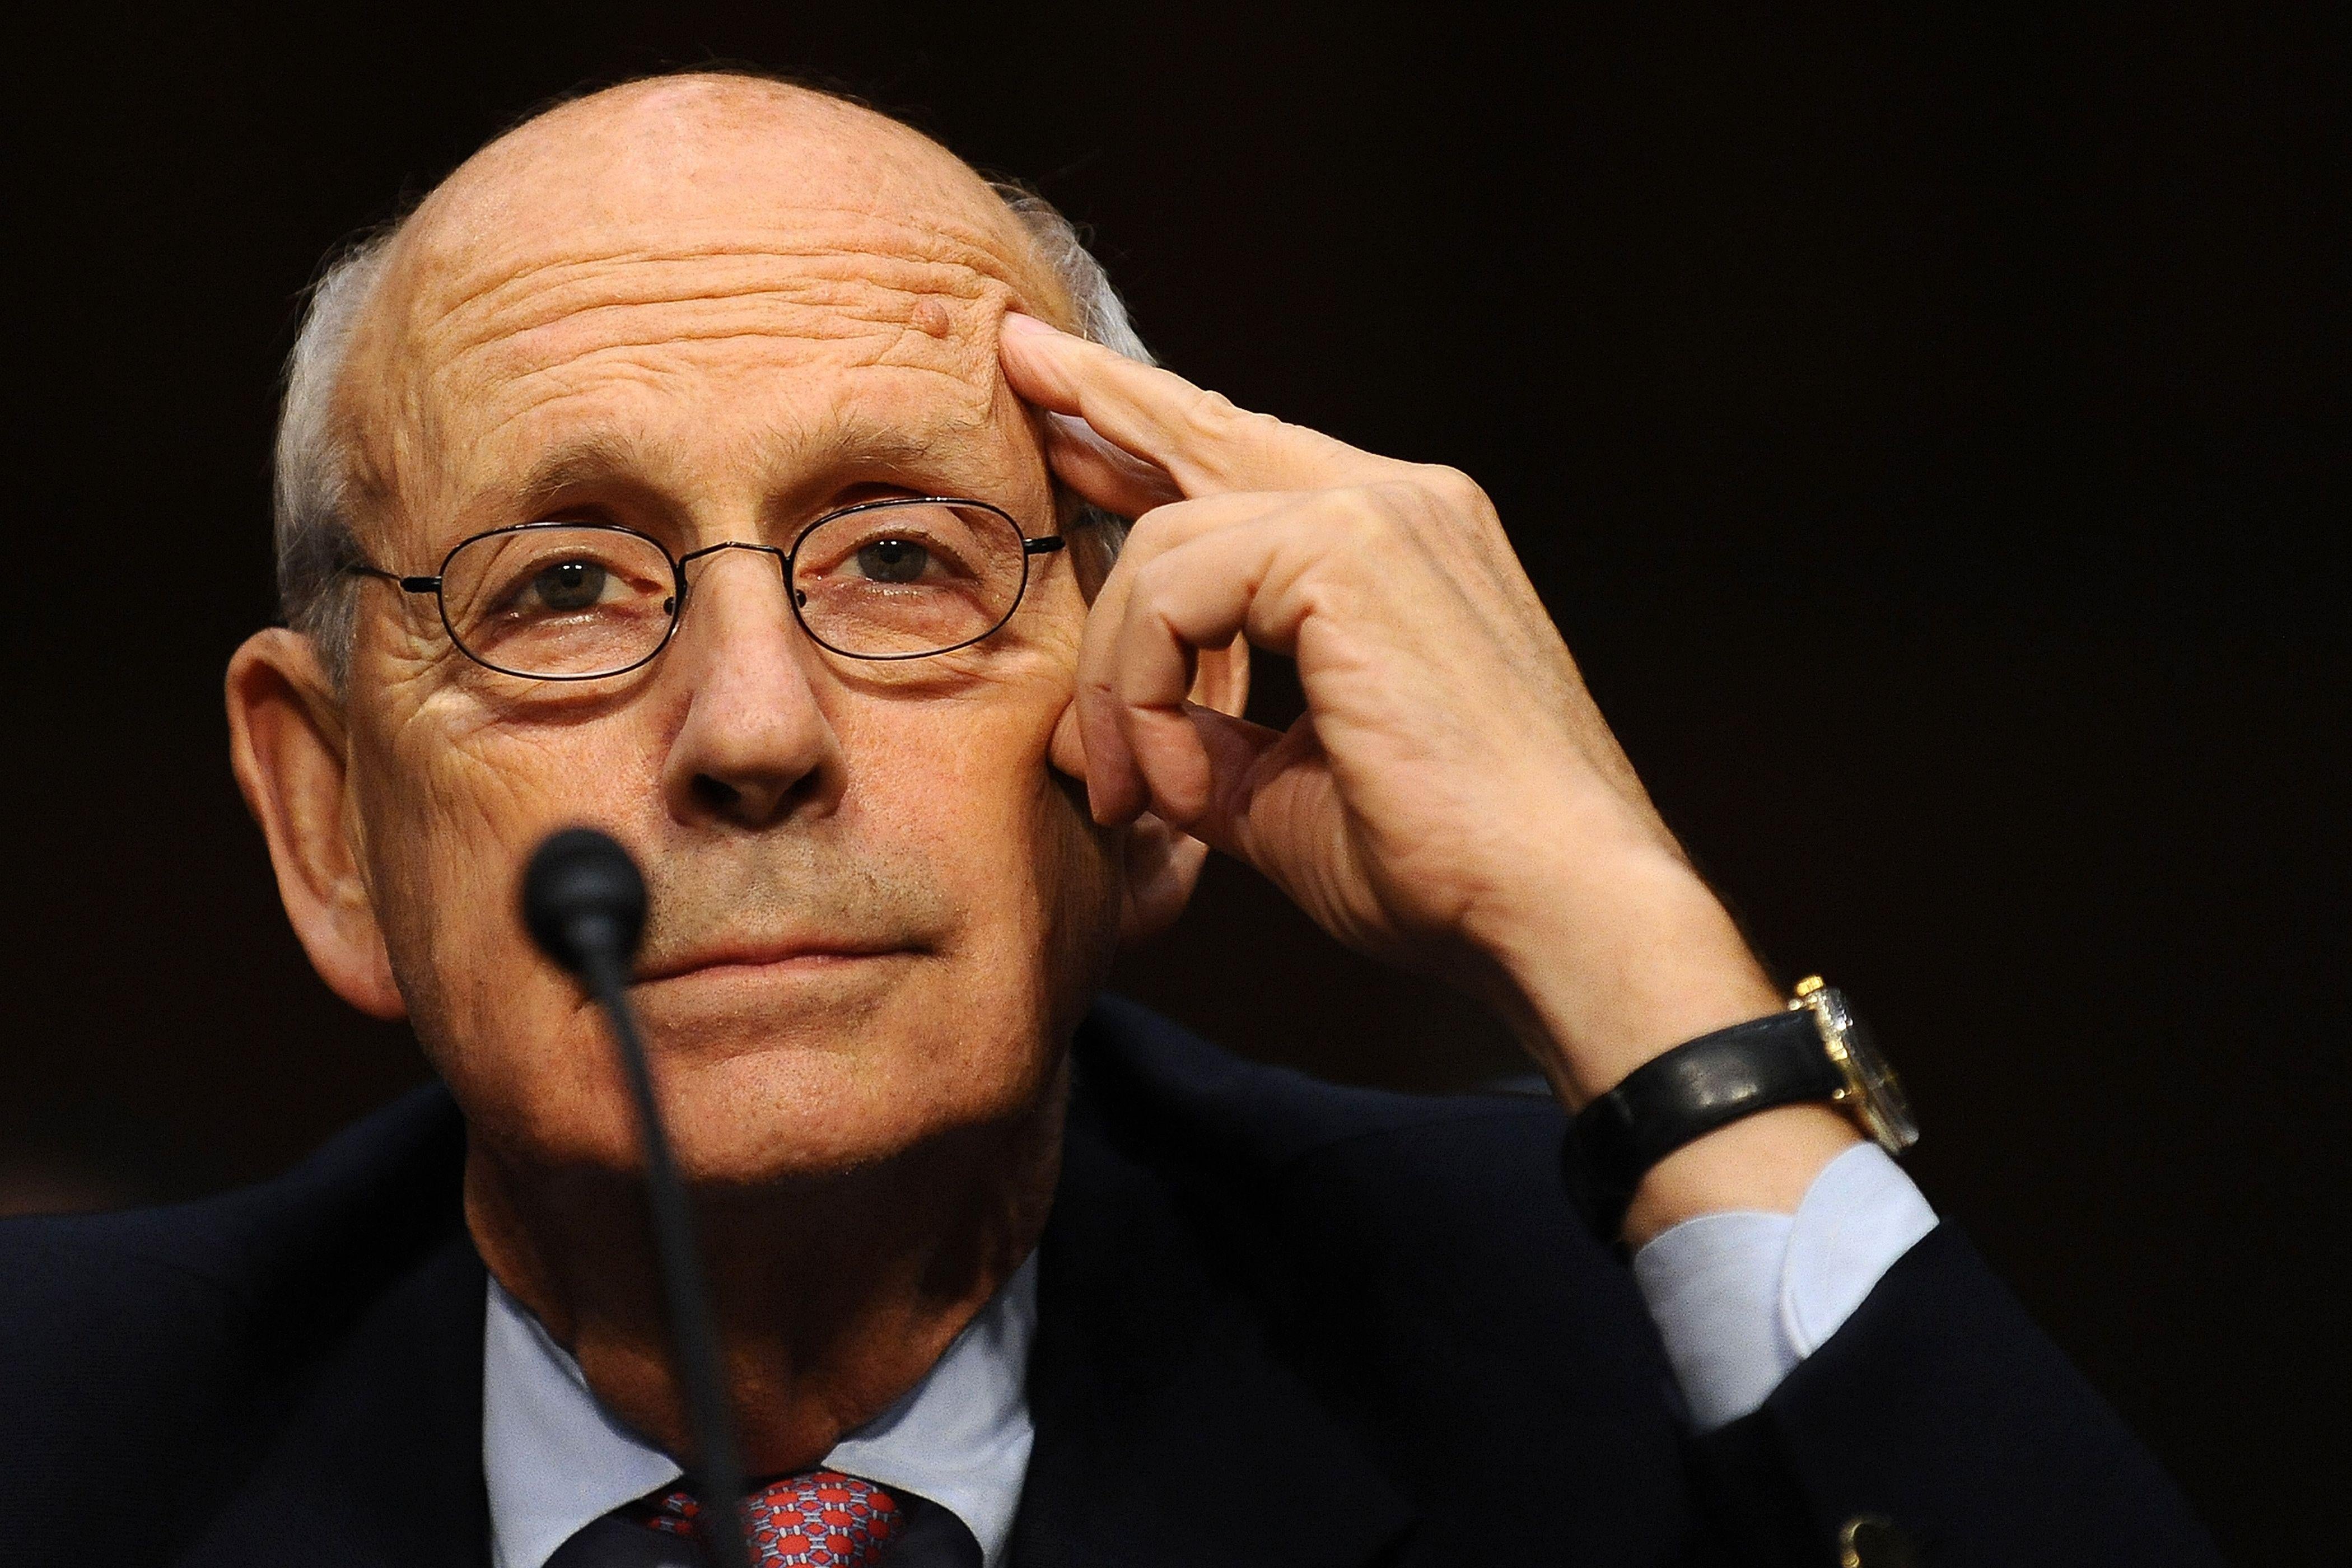 Breyer touches his temple as he smiles mildly sitting in front of a mic